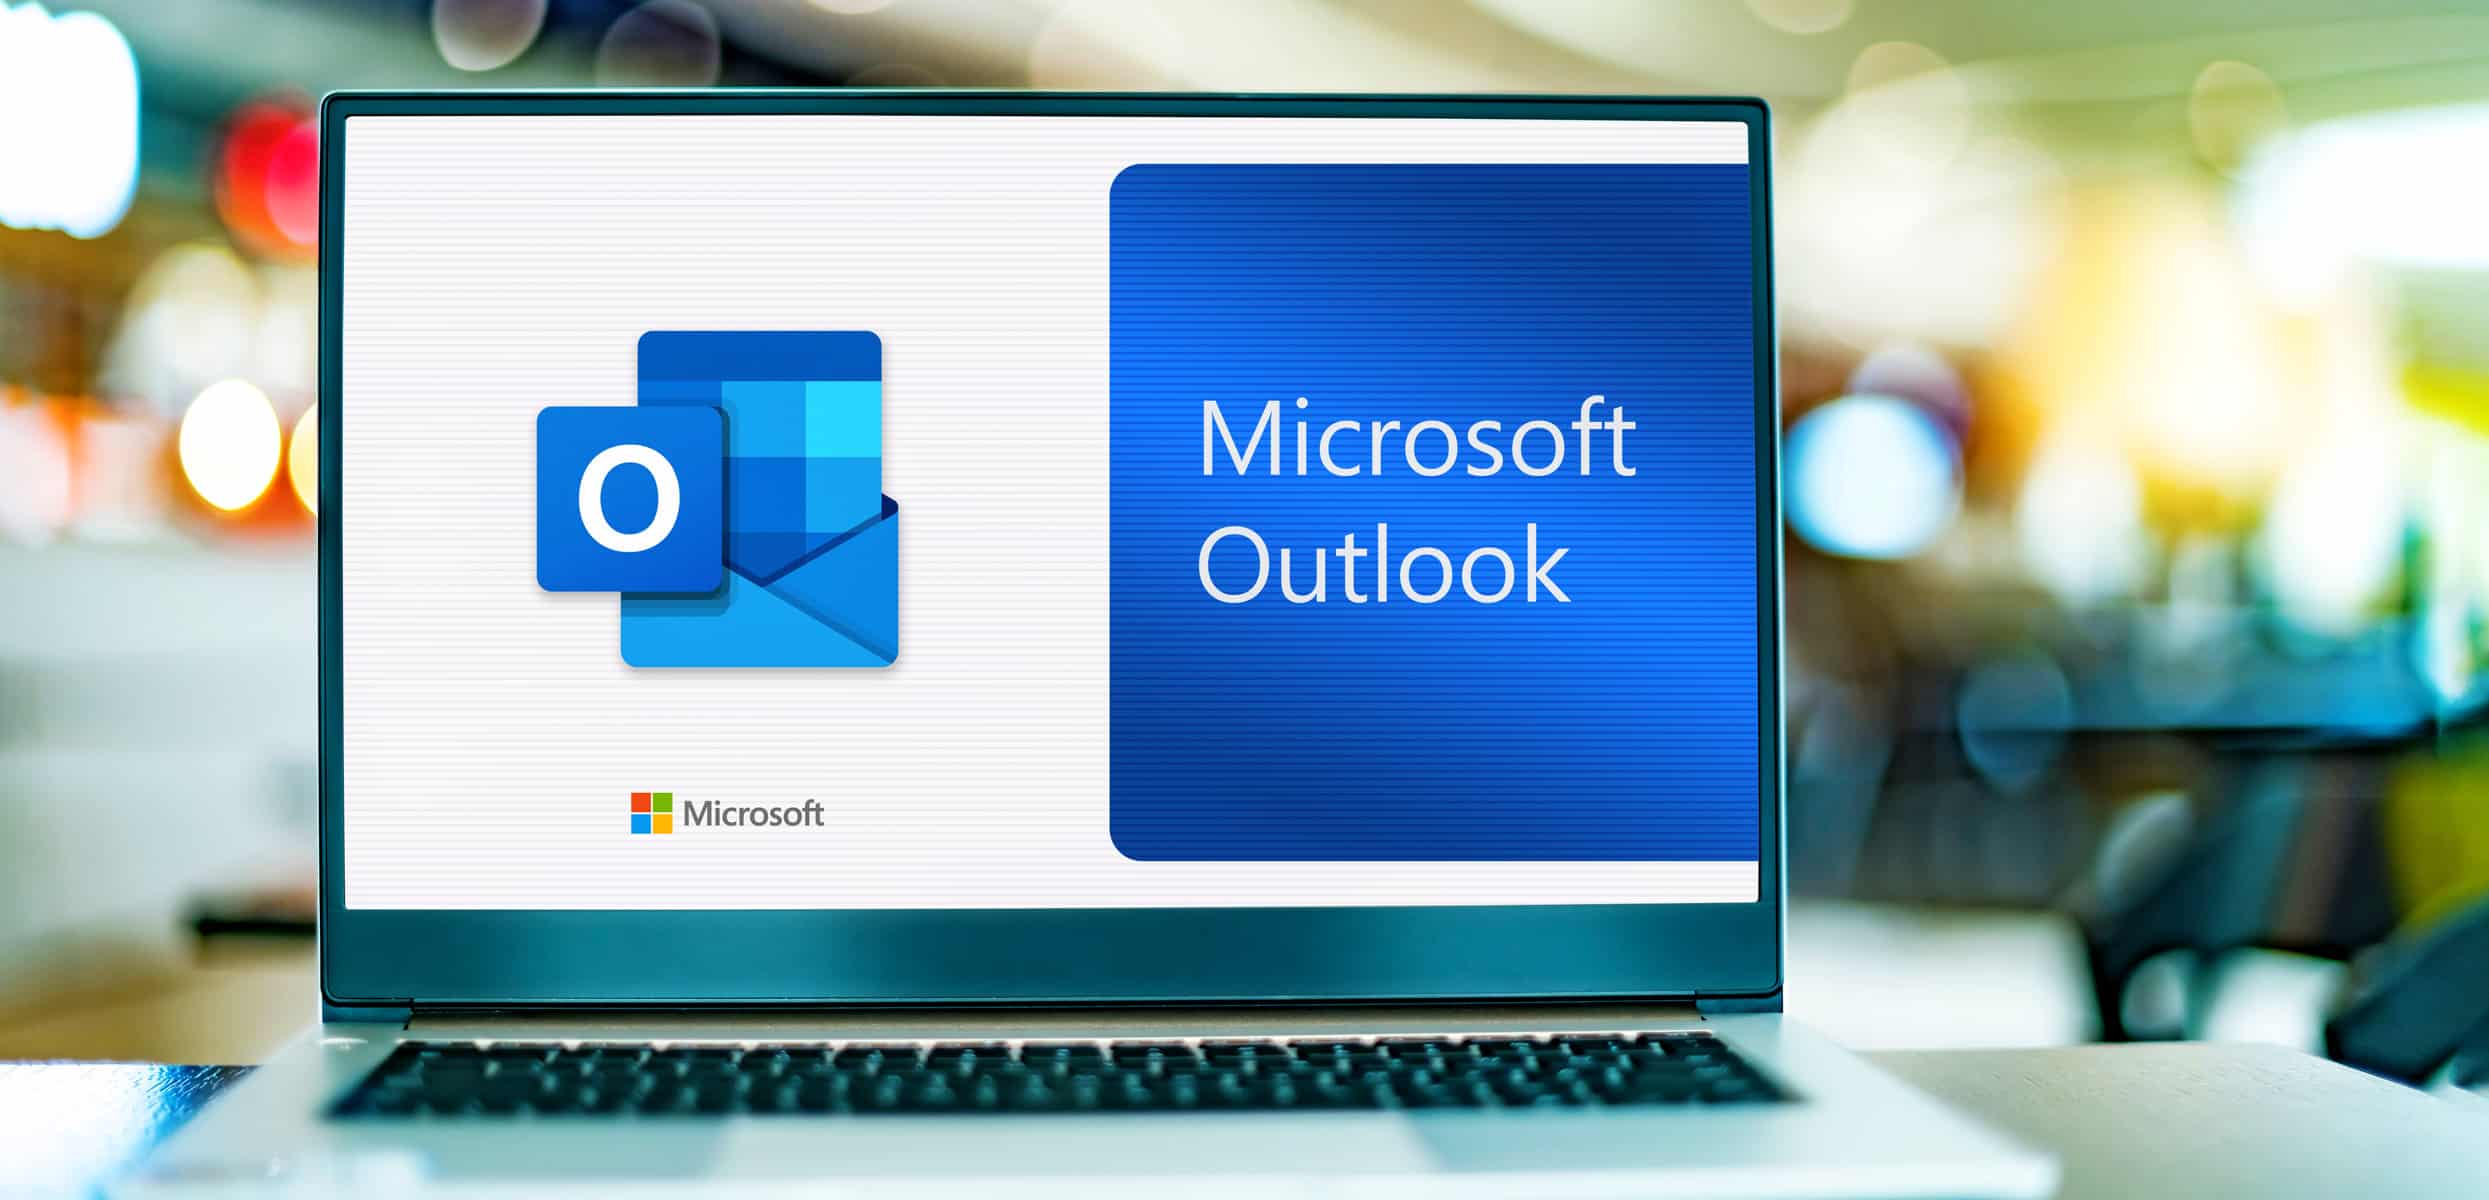 How To Create An Email Template In Outlook